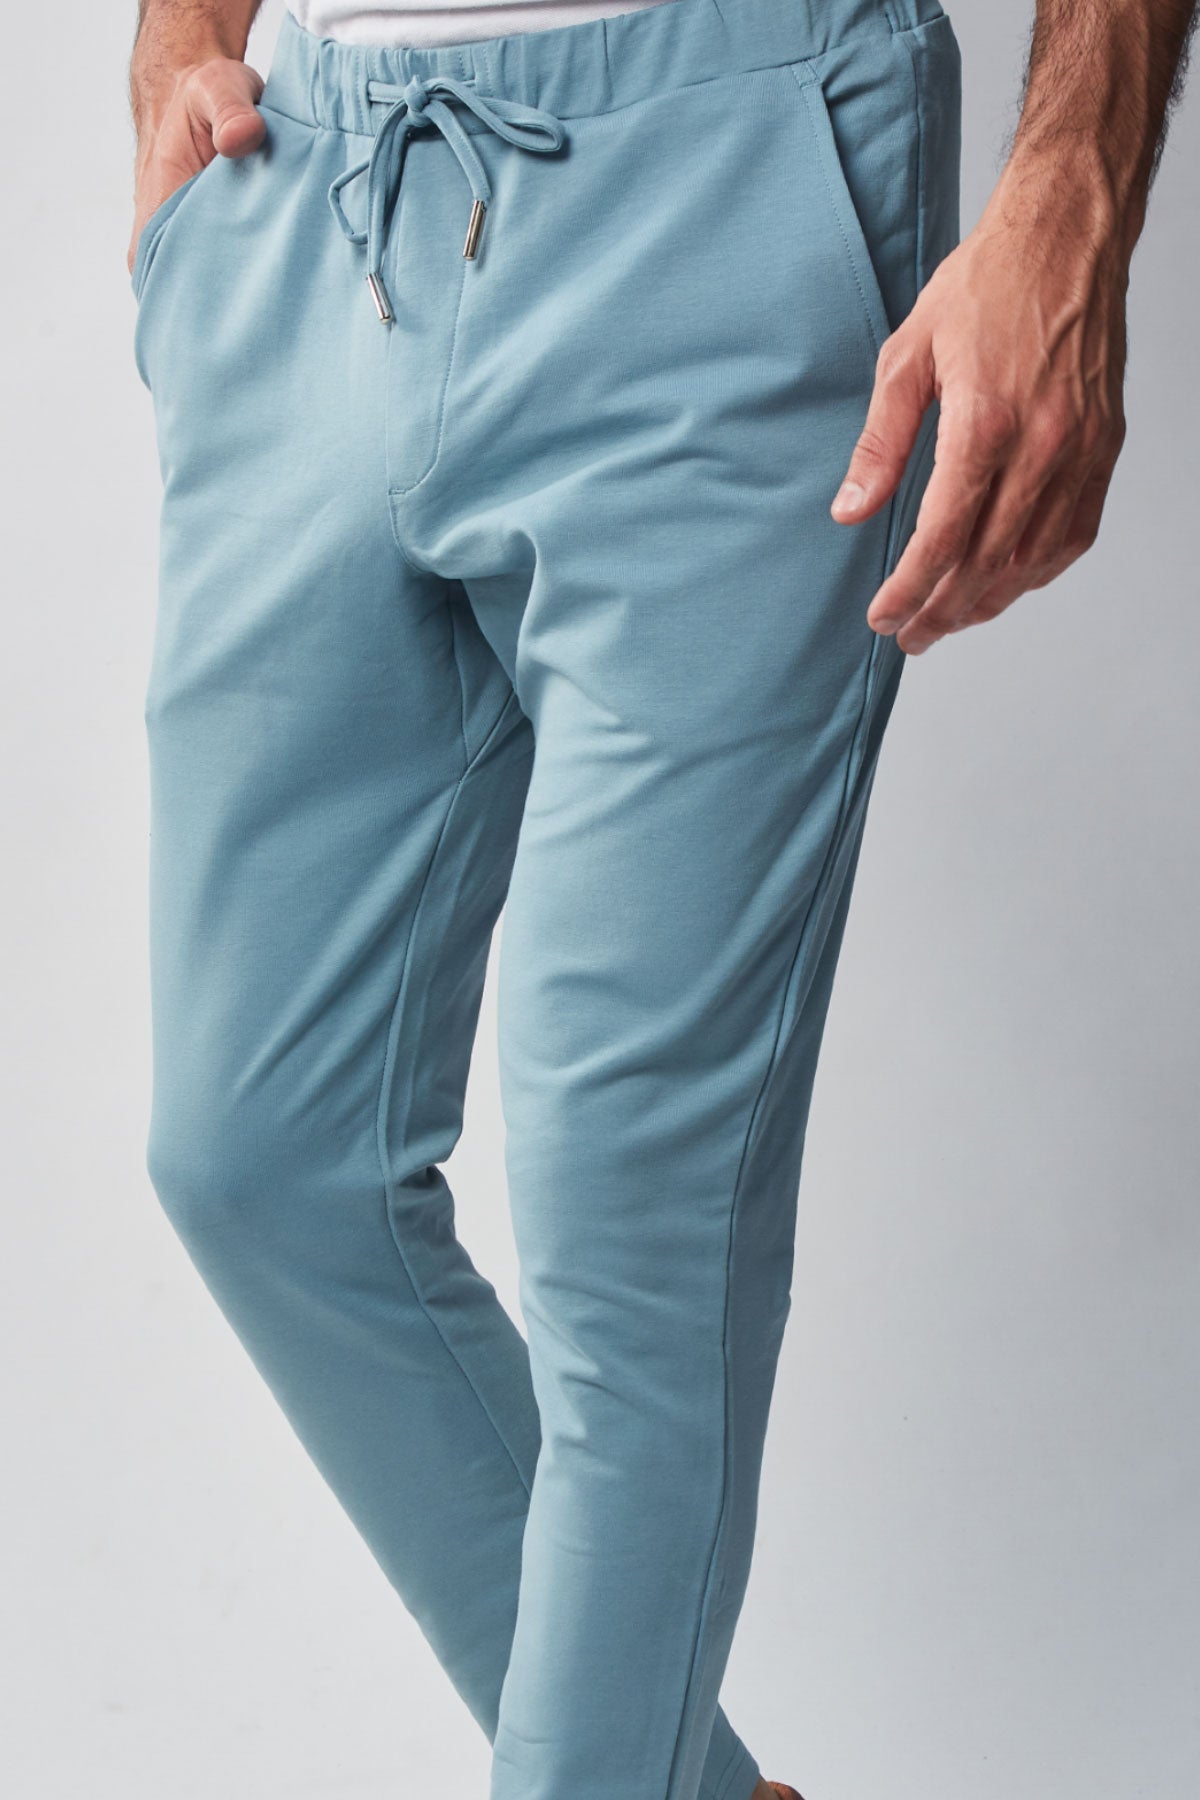 Easy Glacial Blue Sweatpant Beyours Essentials Private Limited